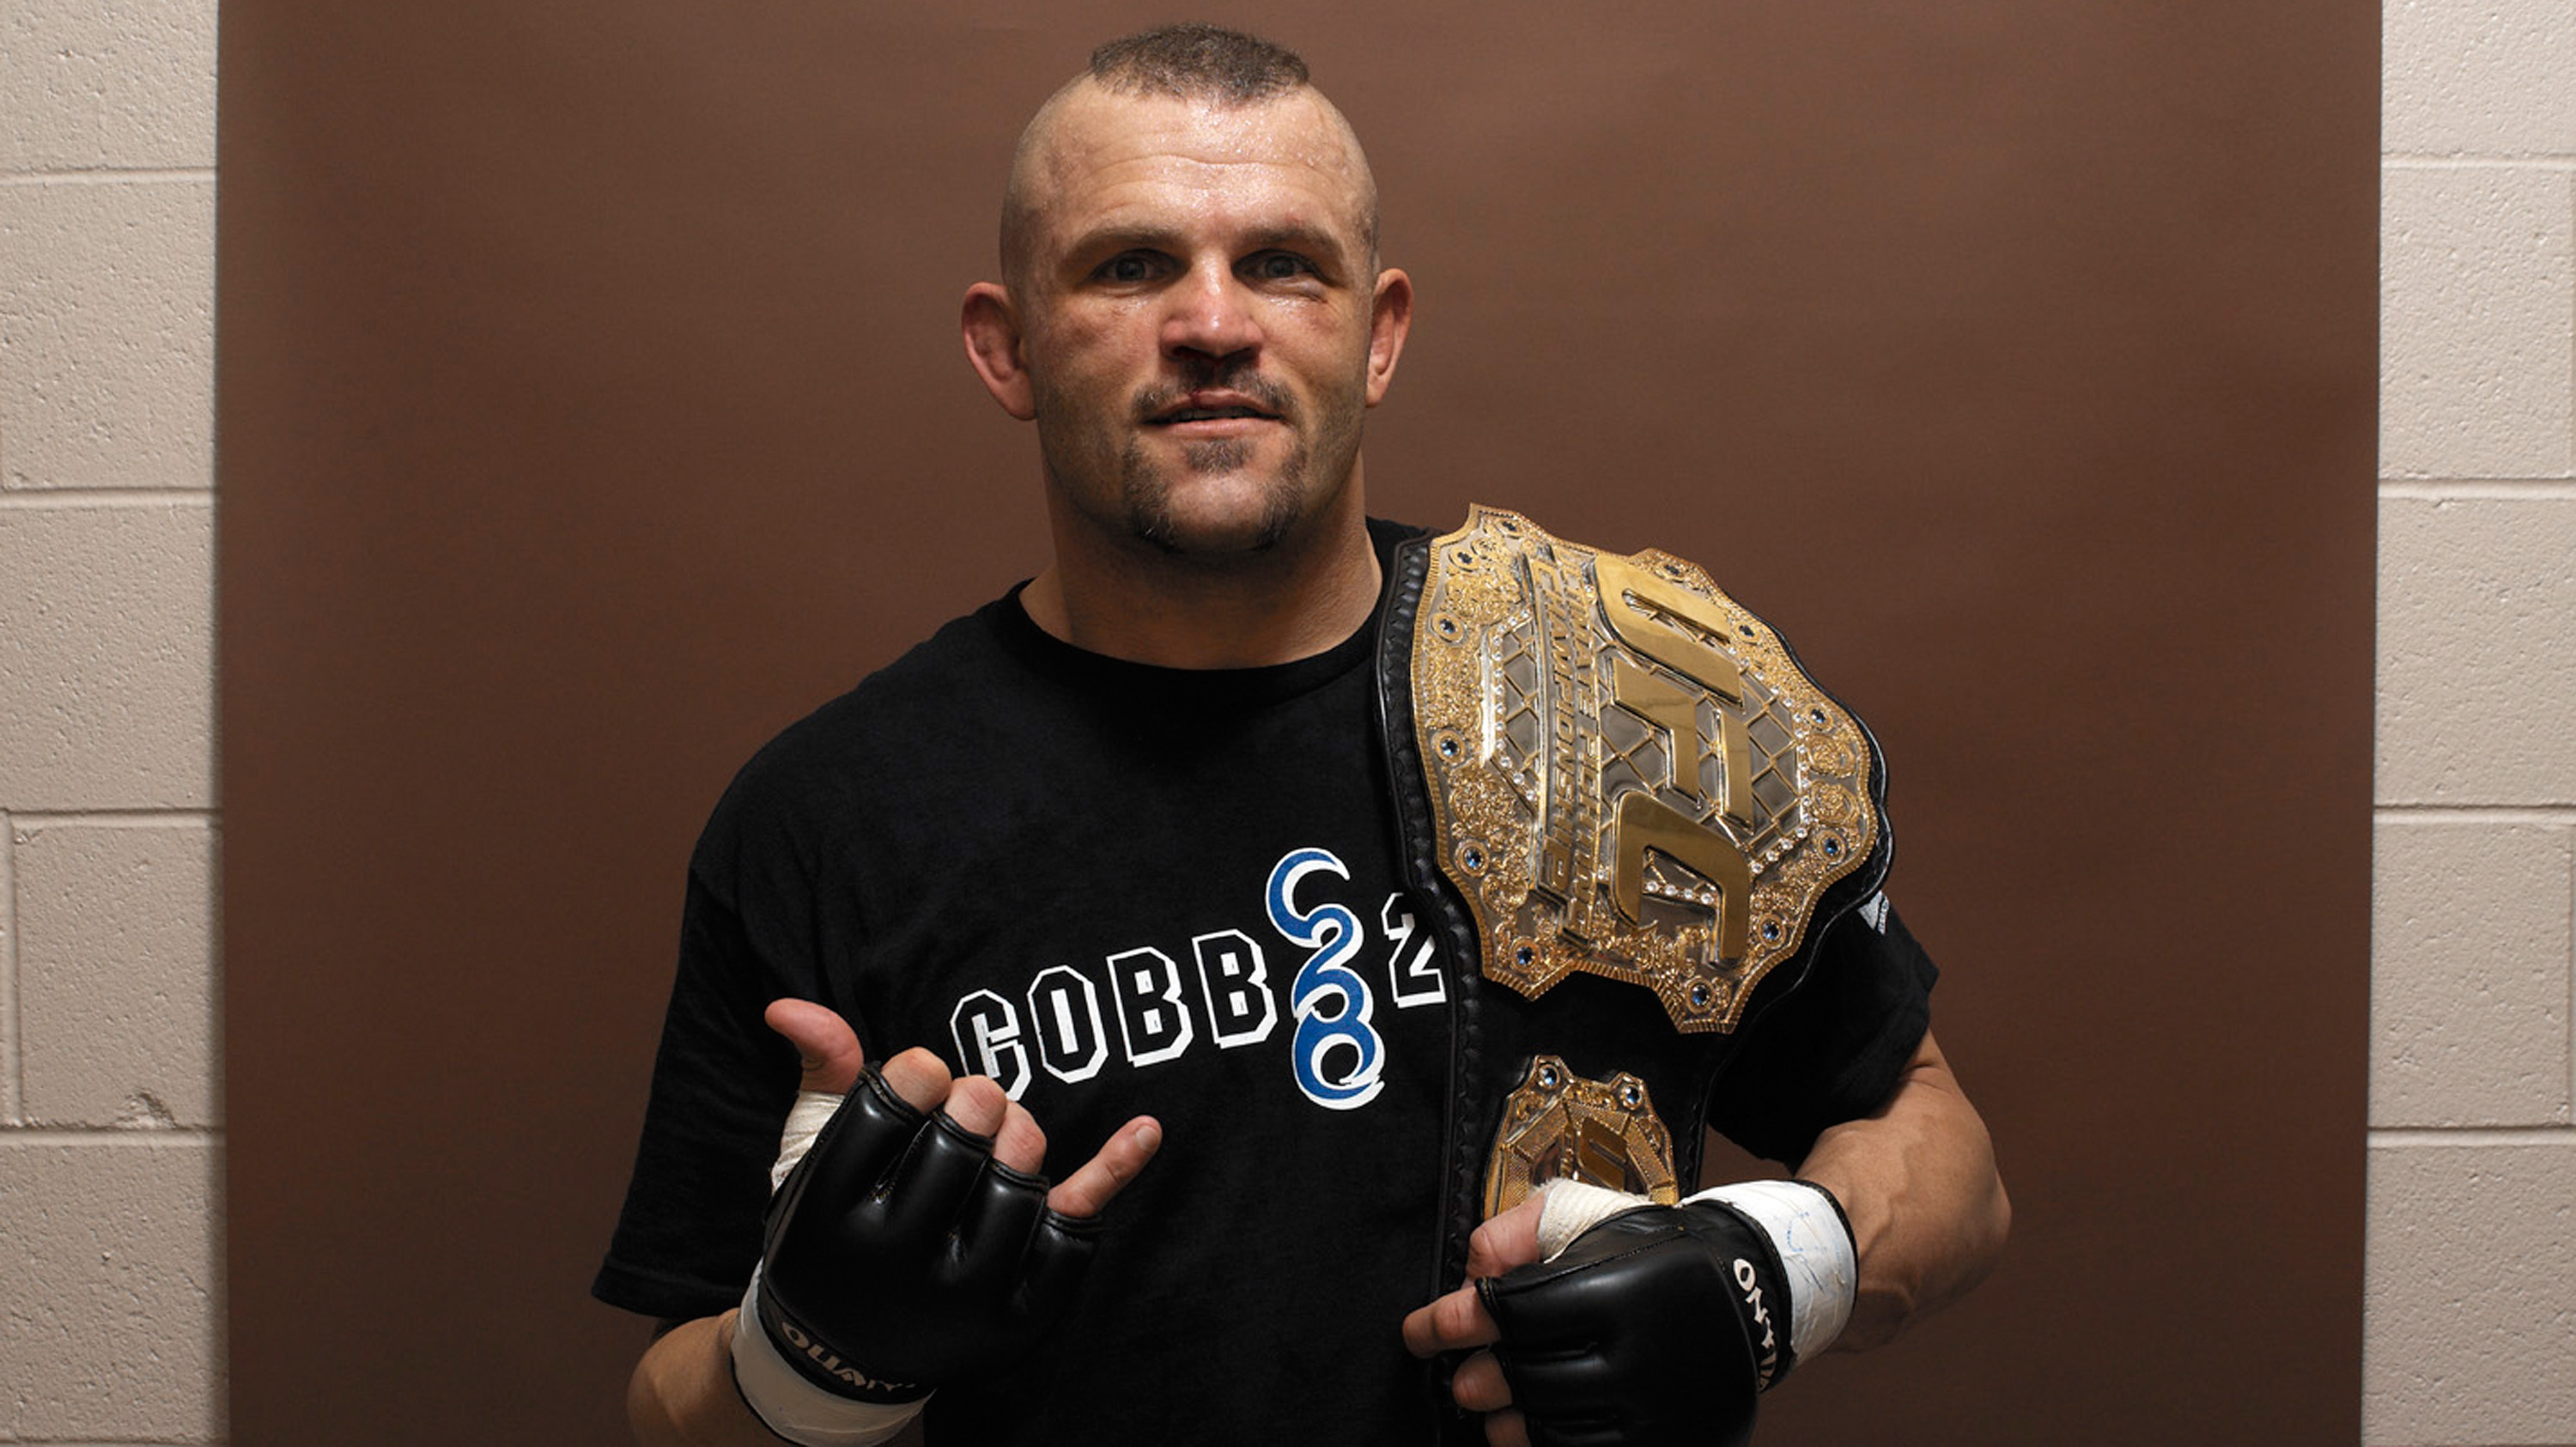 Chuck Liddell Wallpaper Image Photos Pictures Background